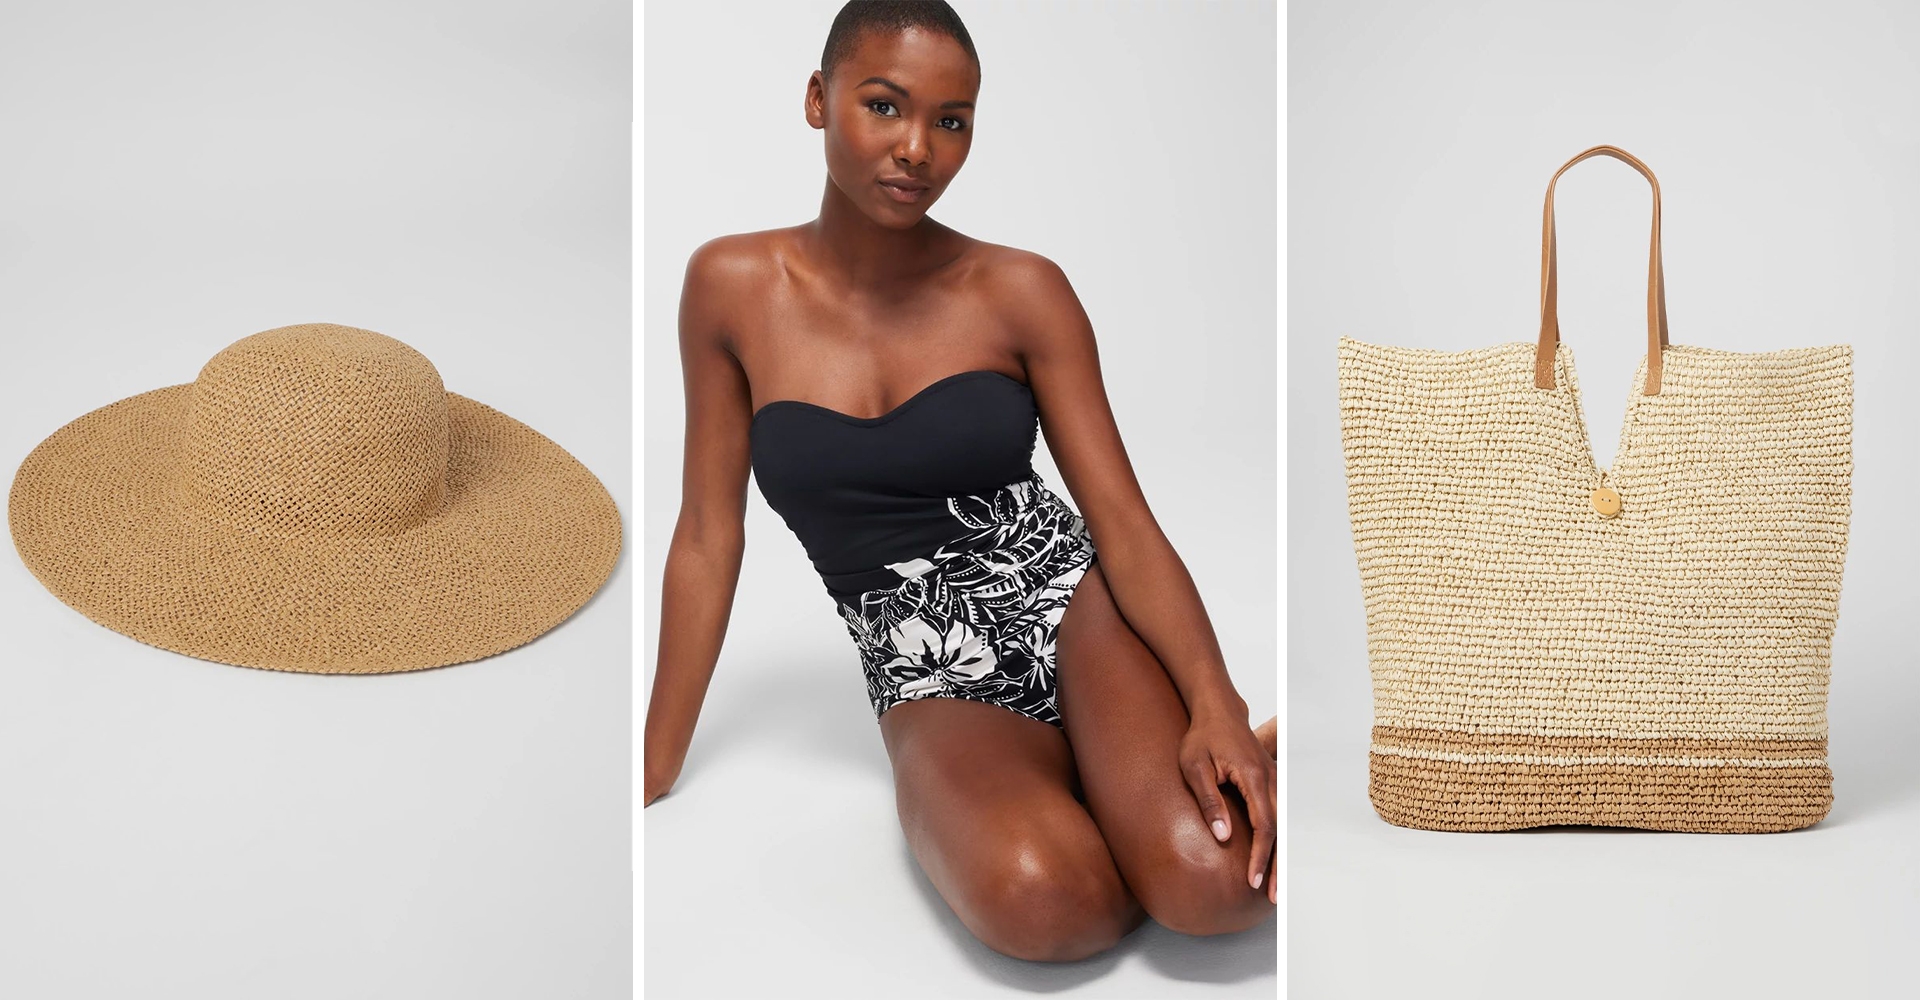 Soma<sup class=st-superscript>®</sup> tan large-brimmed floppy hat, model wearing a black and white floral one-piece swimsuit, and tan oversized beach bag.